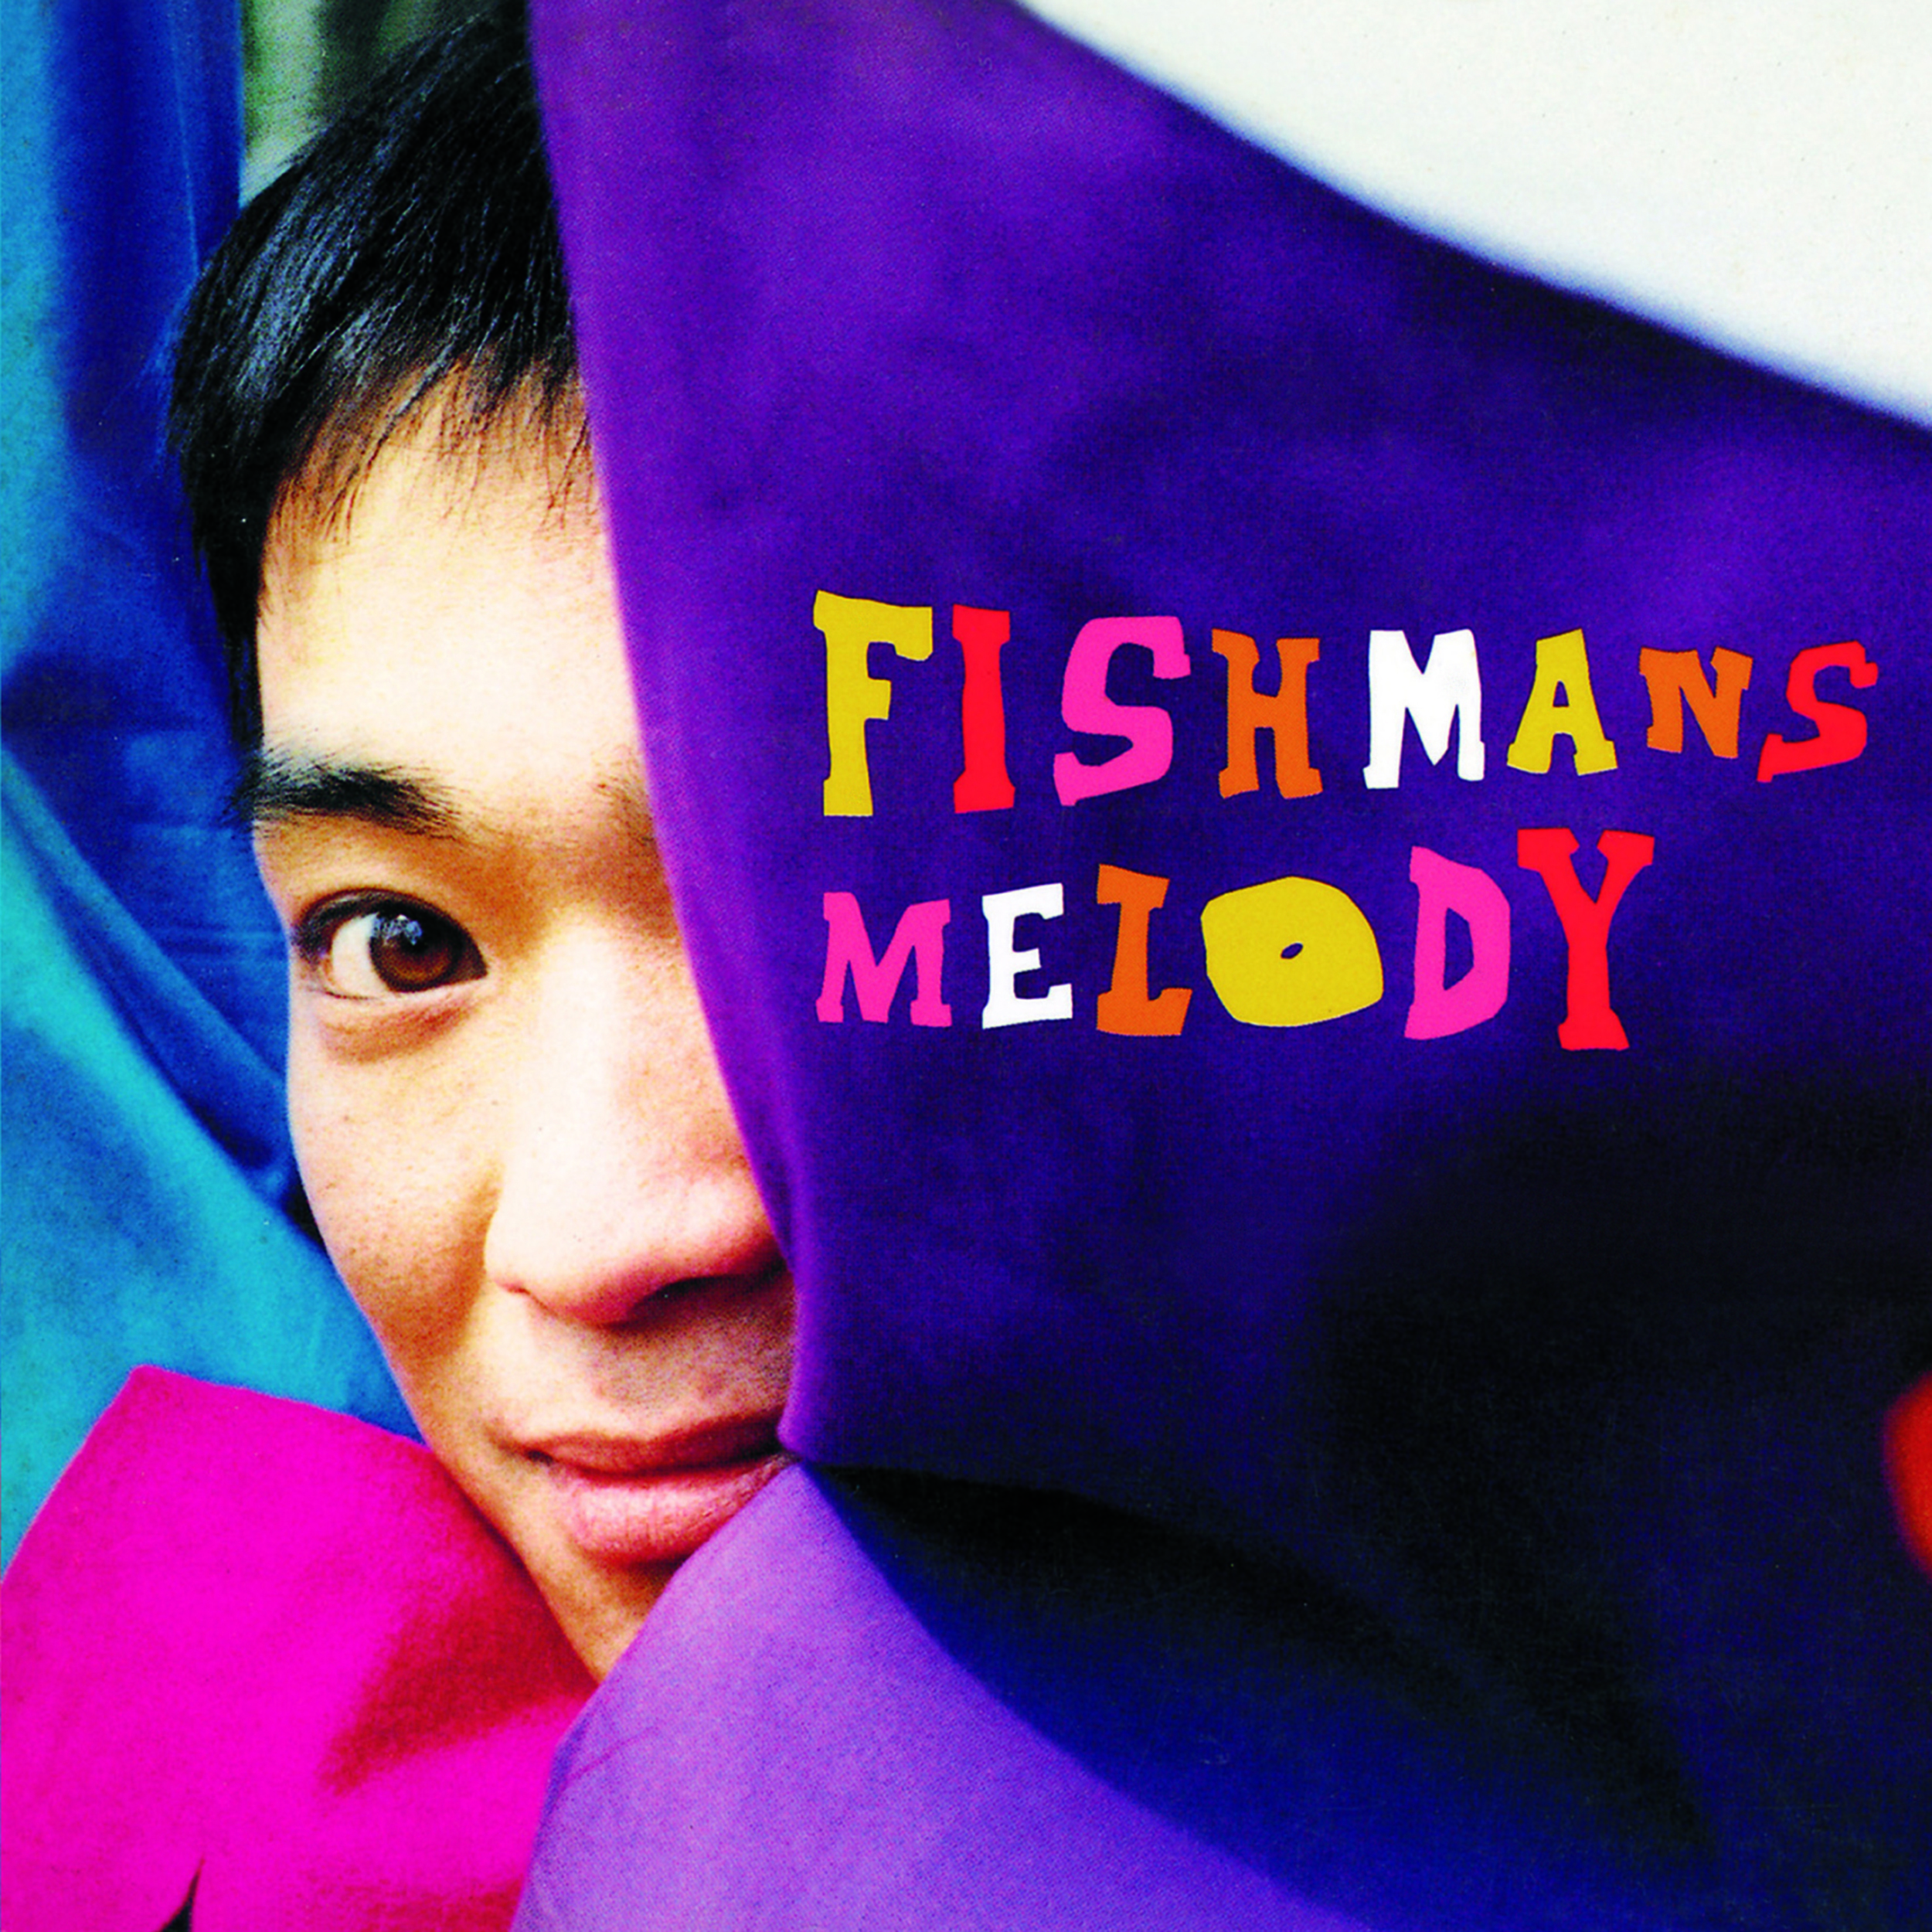 Fishmans "MELODY" (180g heavyweight vinyl) Single-disc Release on March 30th 2022 No.1